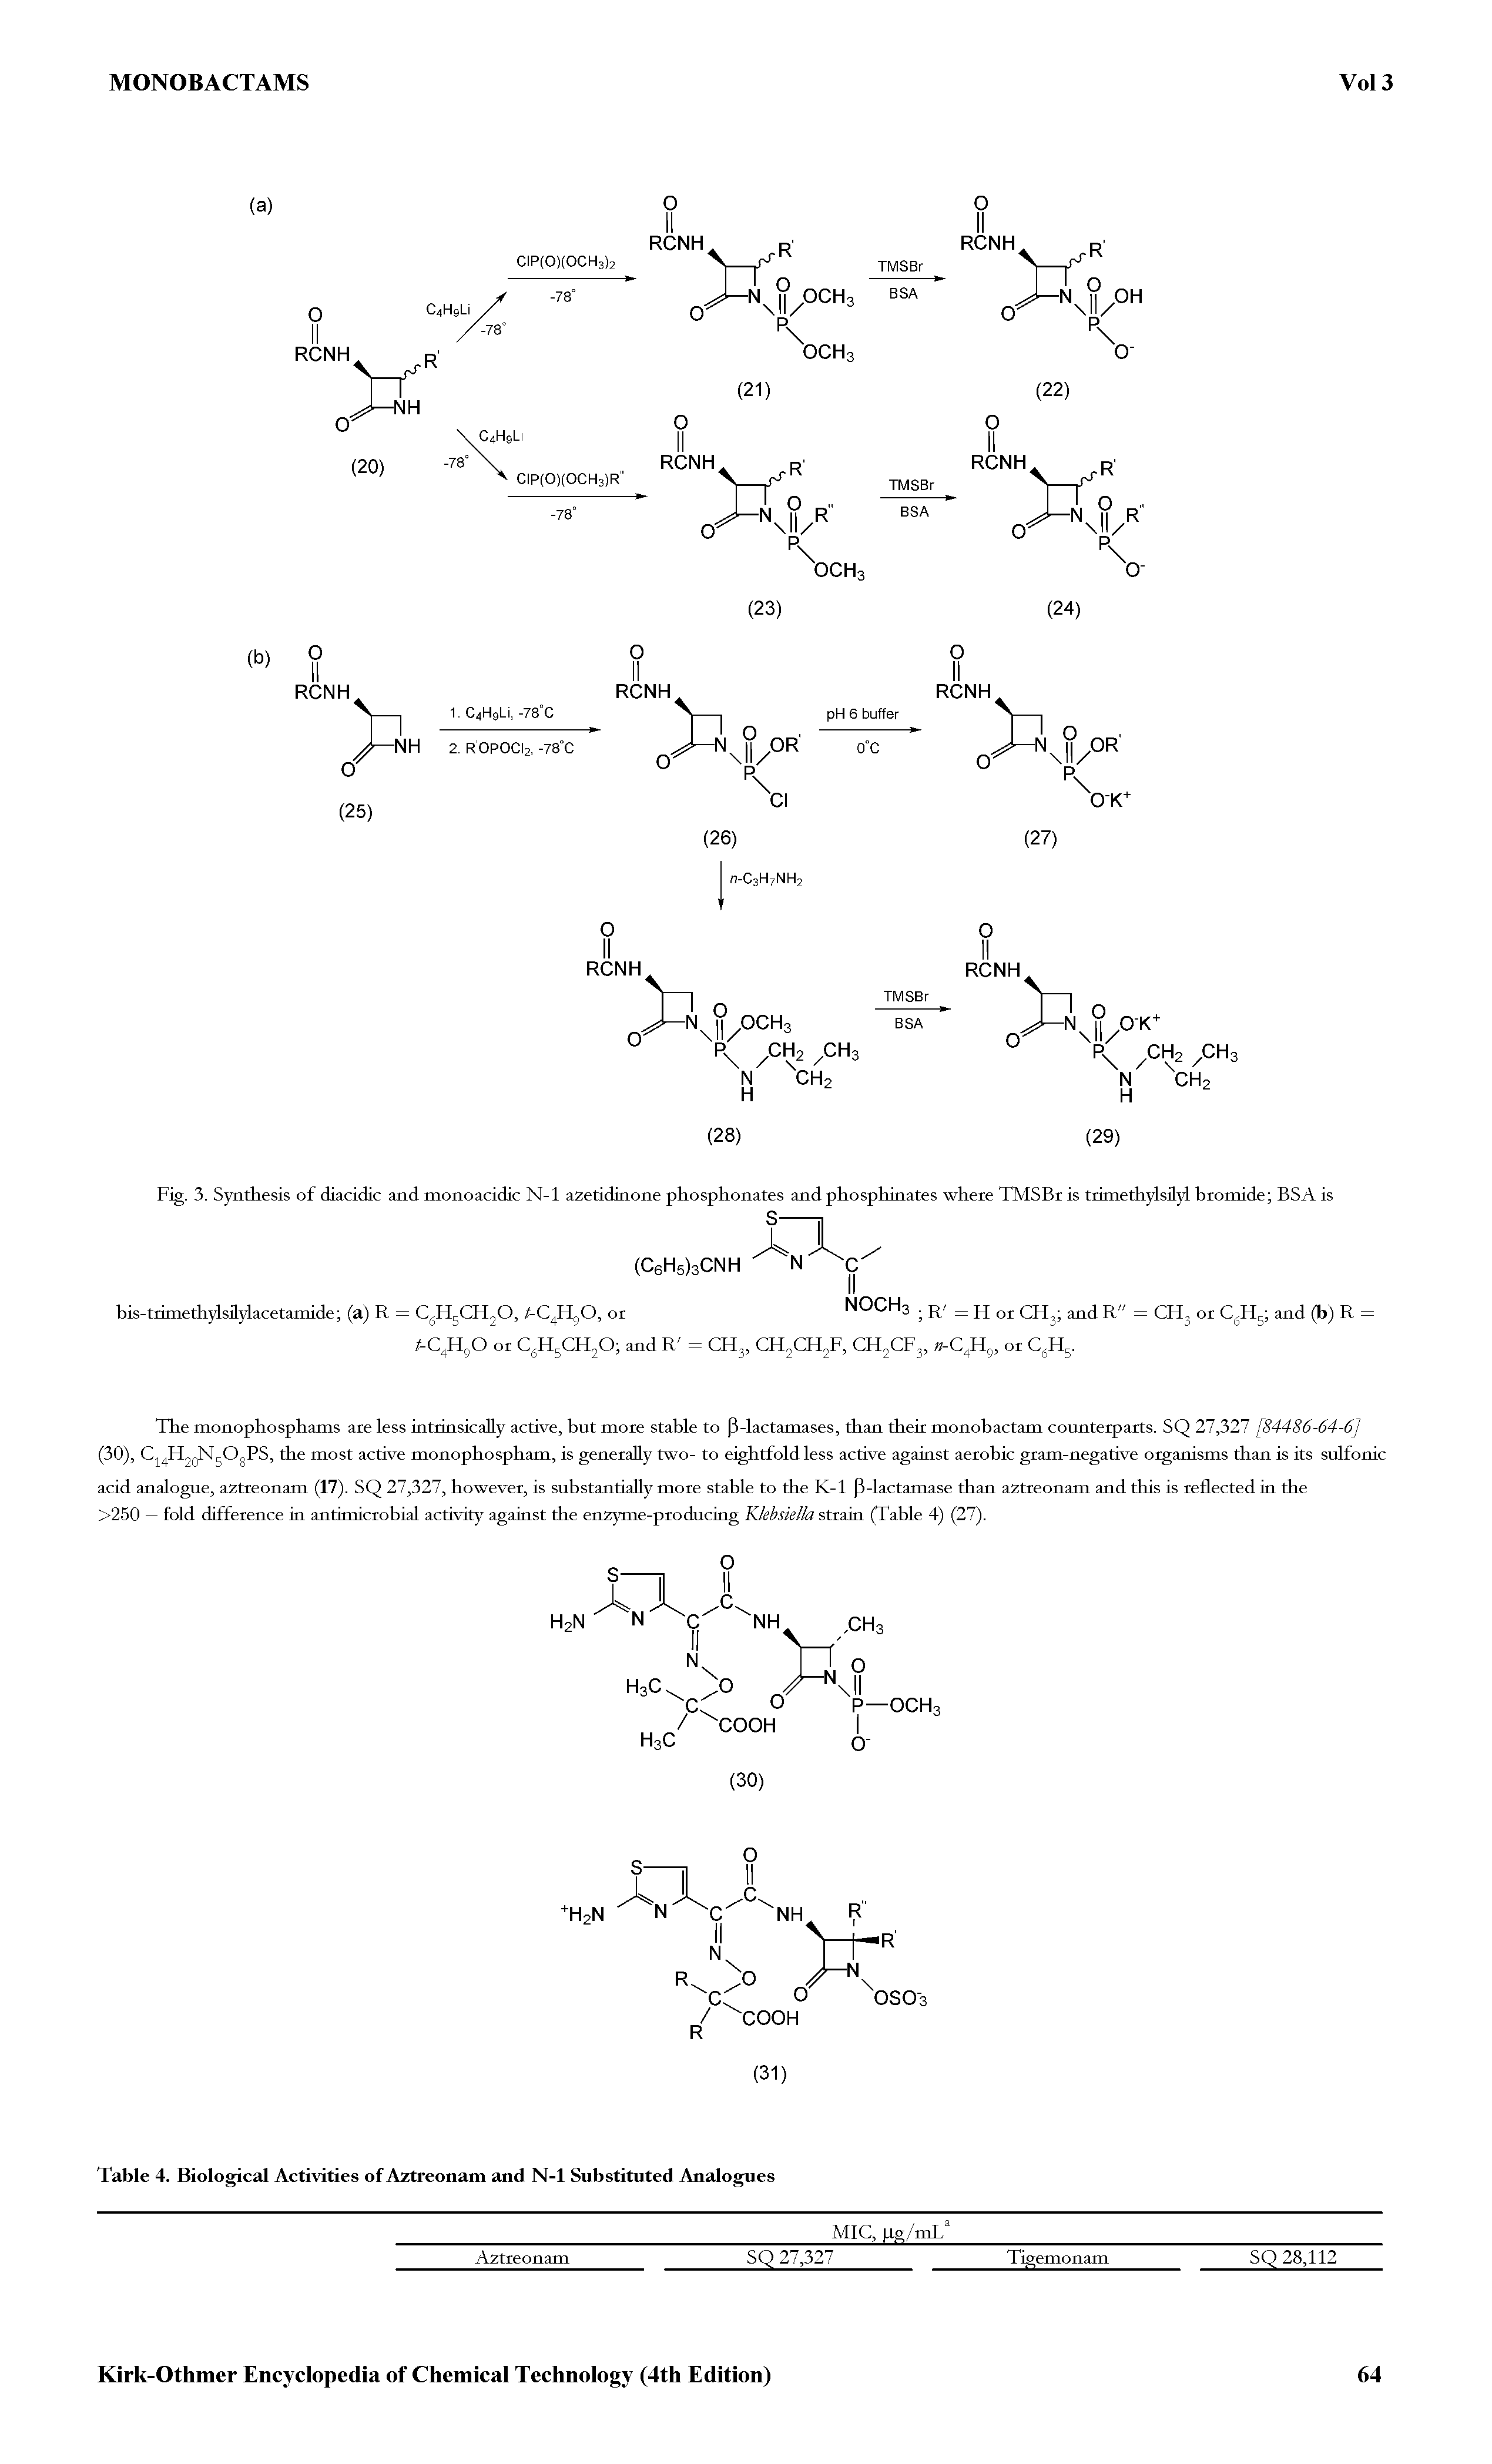 Fig. 3. Synthesis of diacidic and monoacidic N-1 a2etidinone phosphonates and phosphinates where TMSBr is trimethylsilyl bromide BSA is...